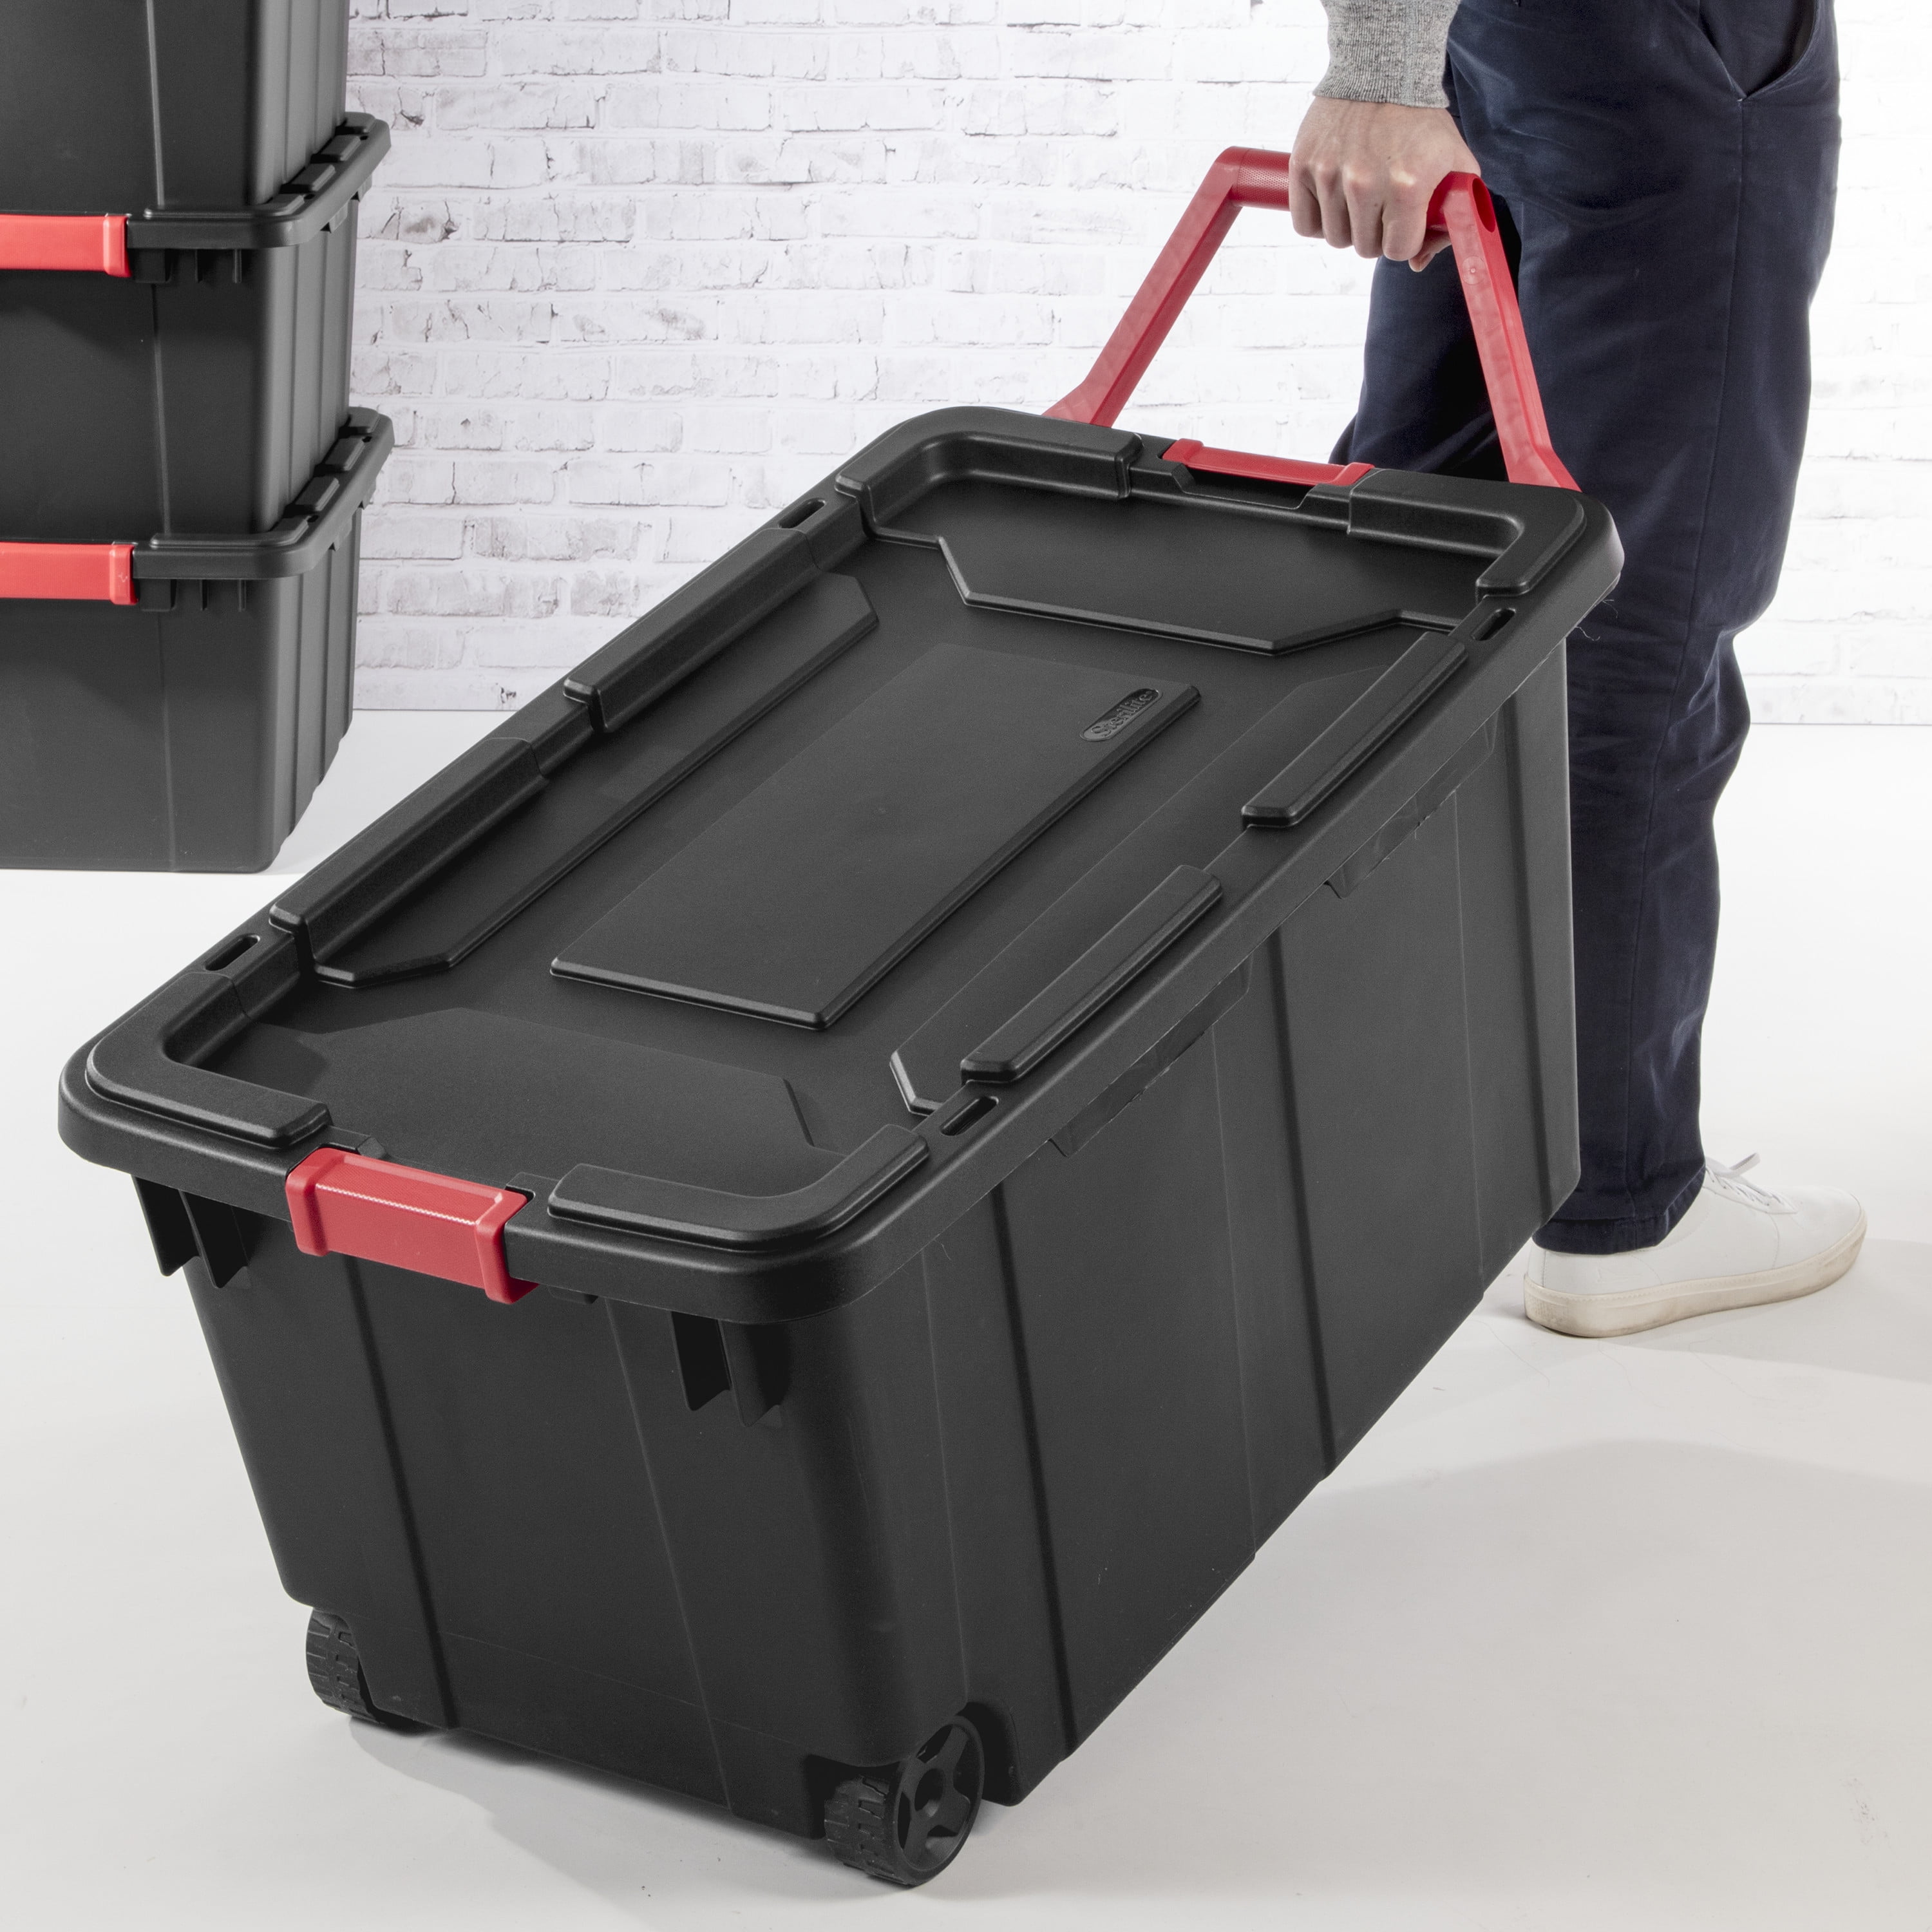 SET OF 2 Wheeled Industrial Extra Large Bins 40 Gallon Durable Storage Tote 